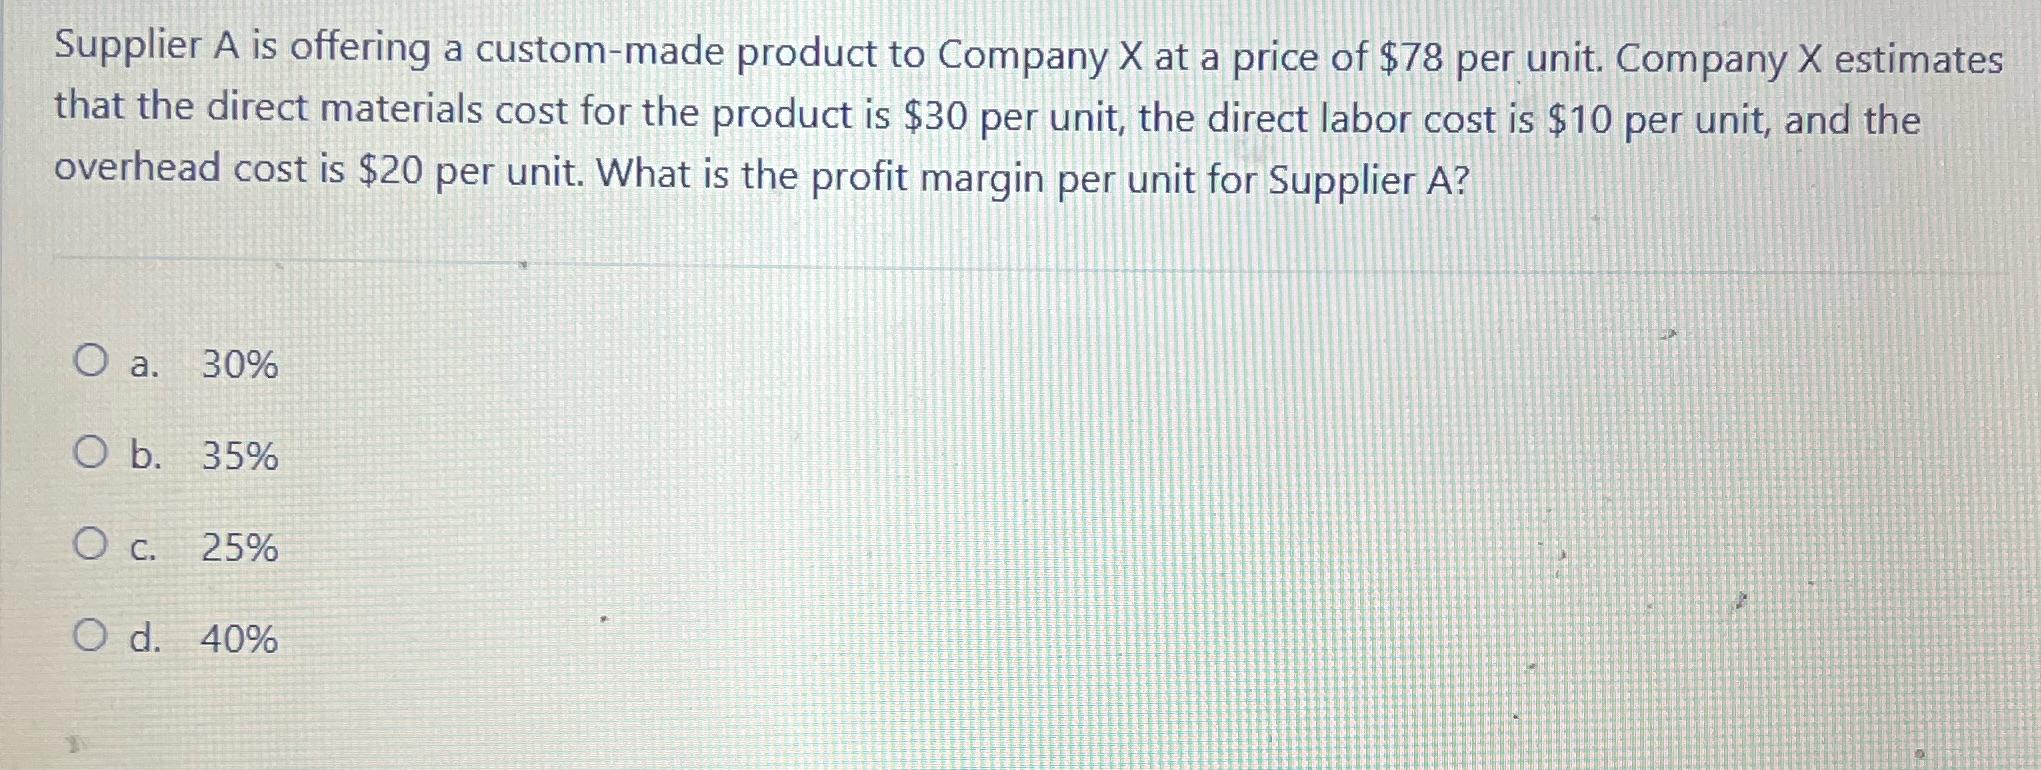 Supplier A is offering a custom-made product to Company X at a price of $78 per unit. Company X estimates